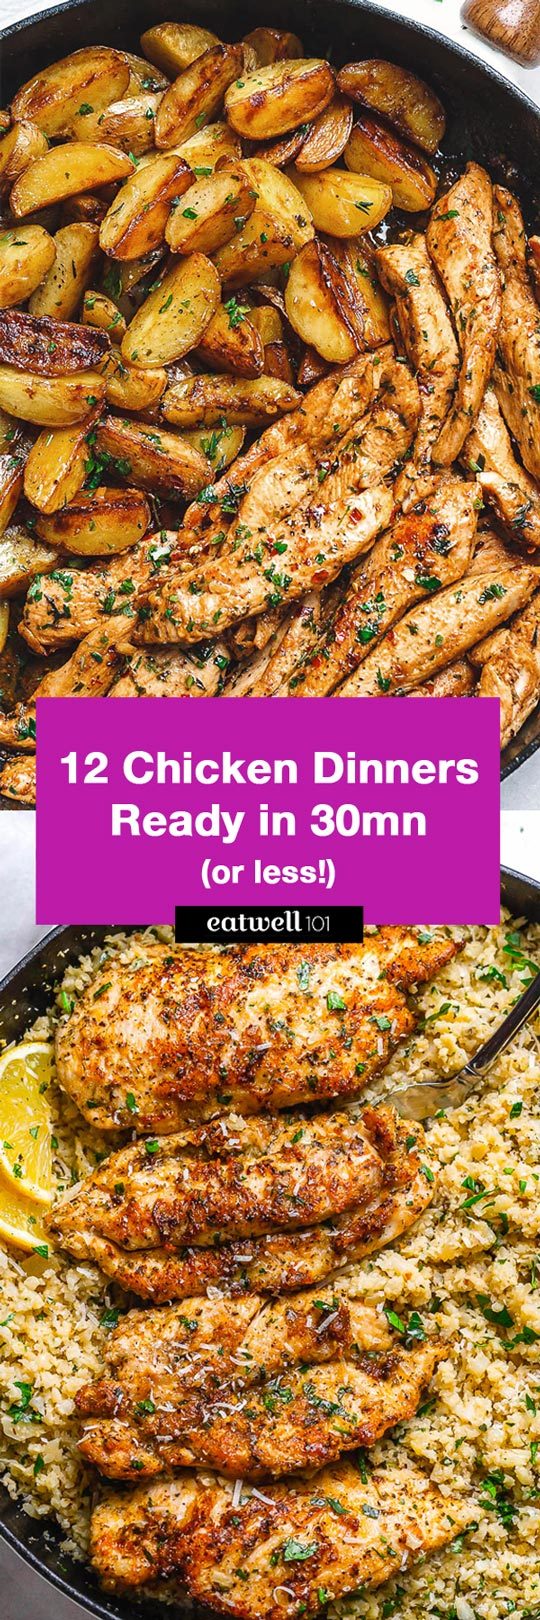 72 Easy Quick & Healthy Meals - Low-Cal, Fast, Healthy Recipes